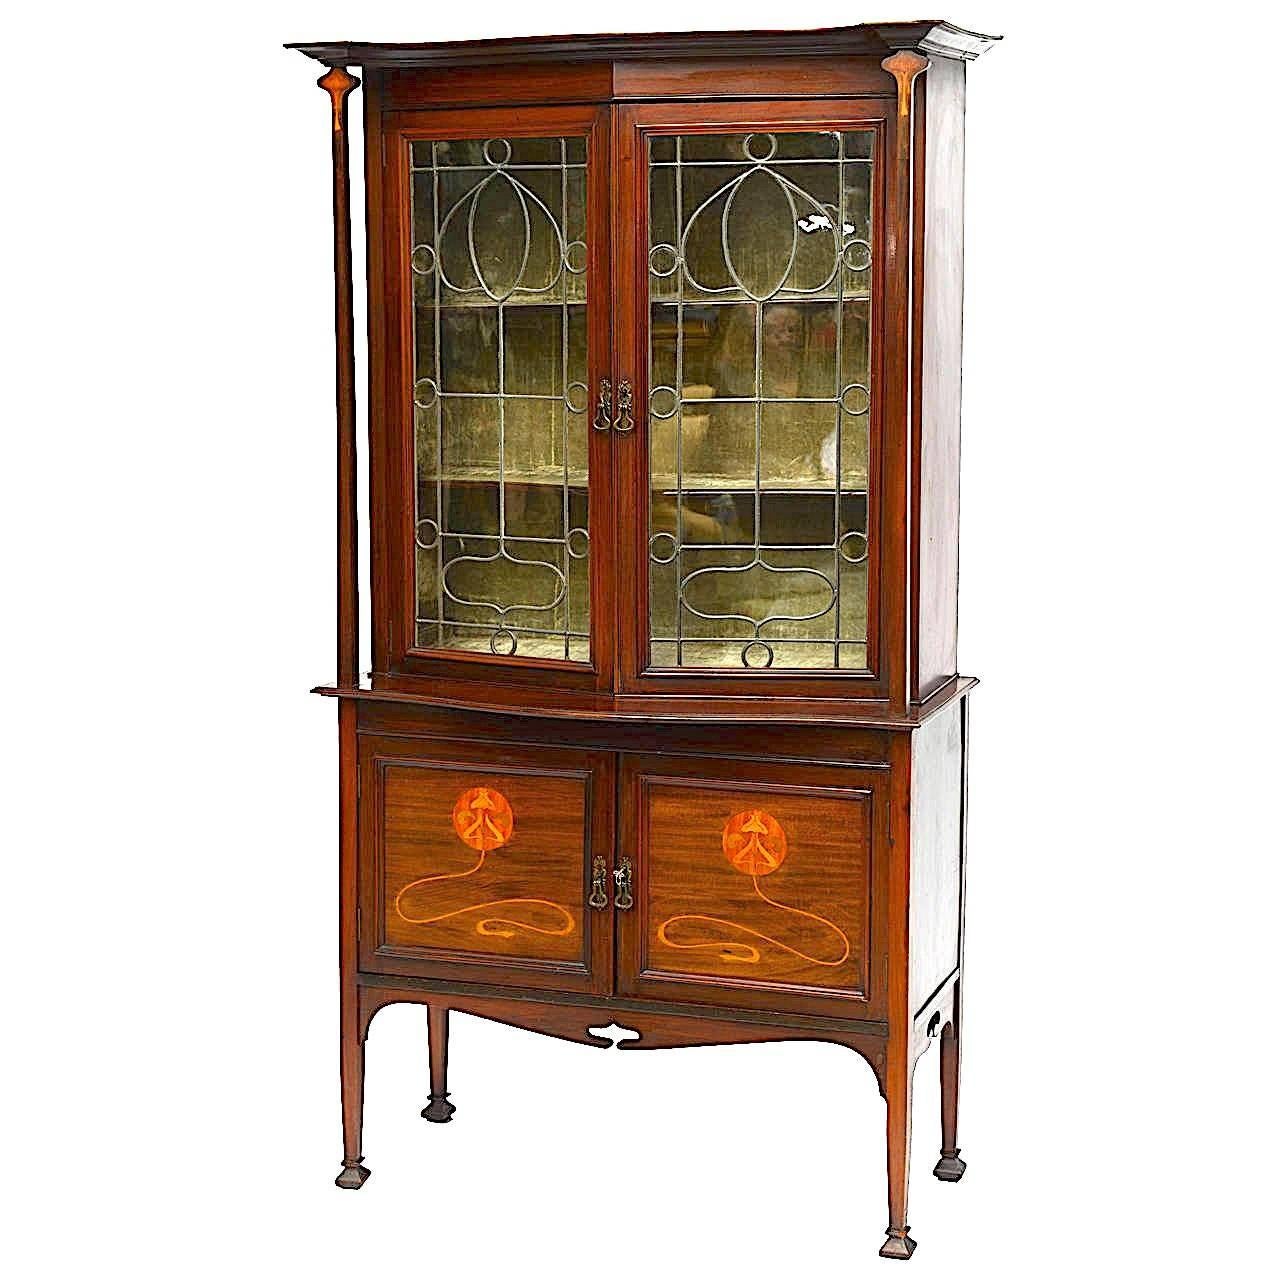 Tycoon's Art Nouveau Marquetry Cabinet Iconic Galle Style, circa 1910 Provenance For Sale